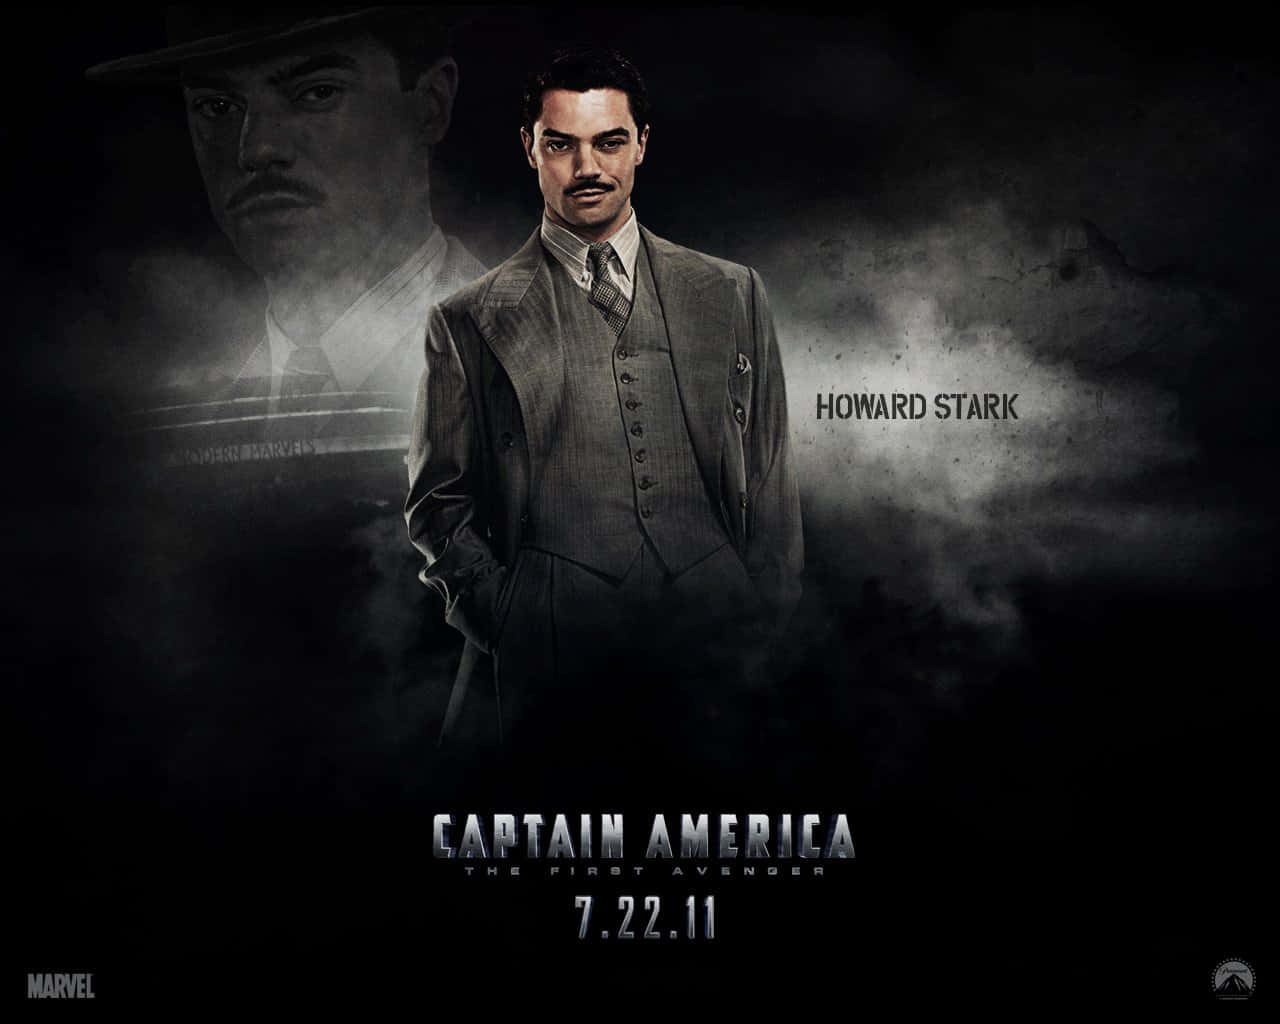 “It’s a new era for Science and Technology, led by Howard Stark” Wallpaper